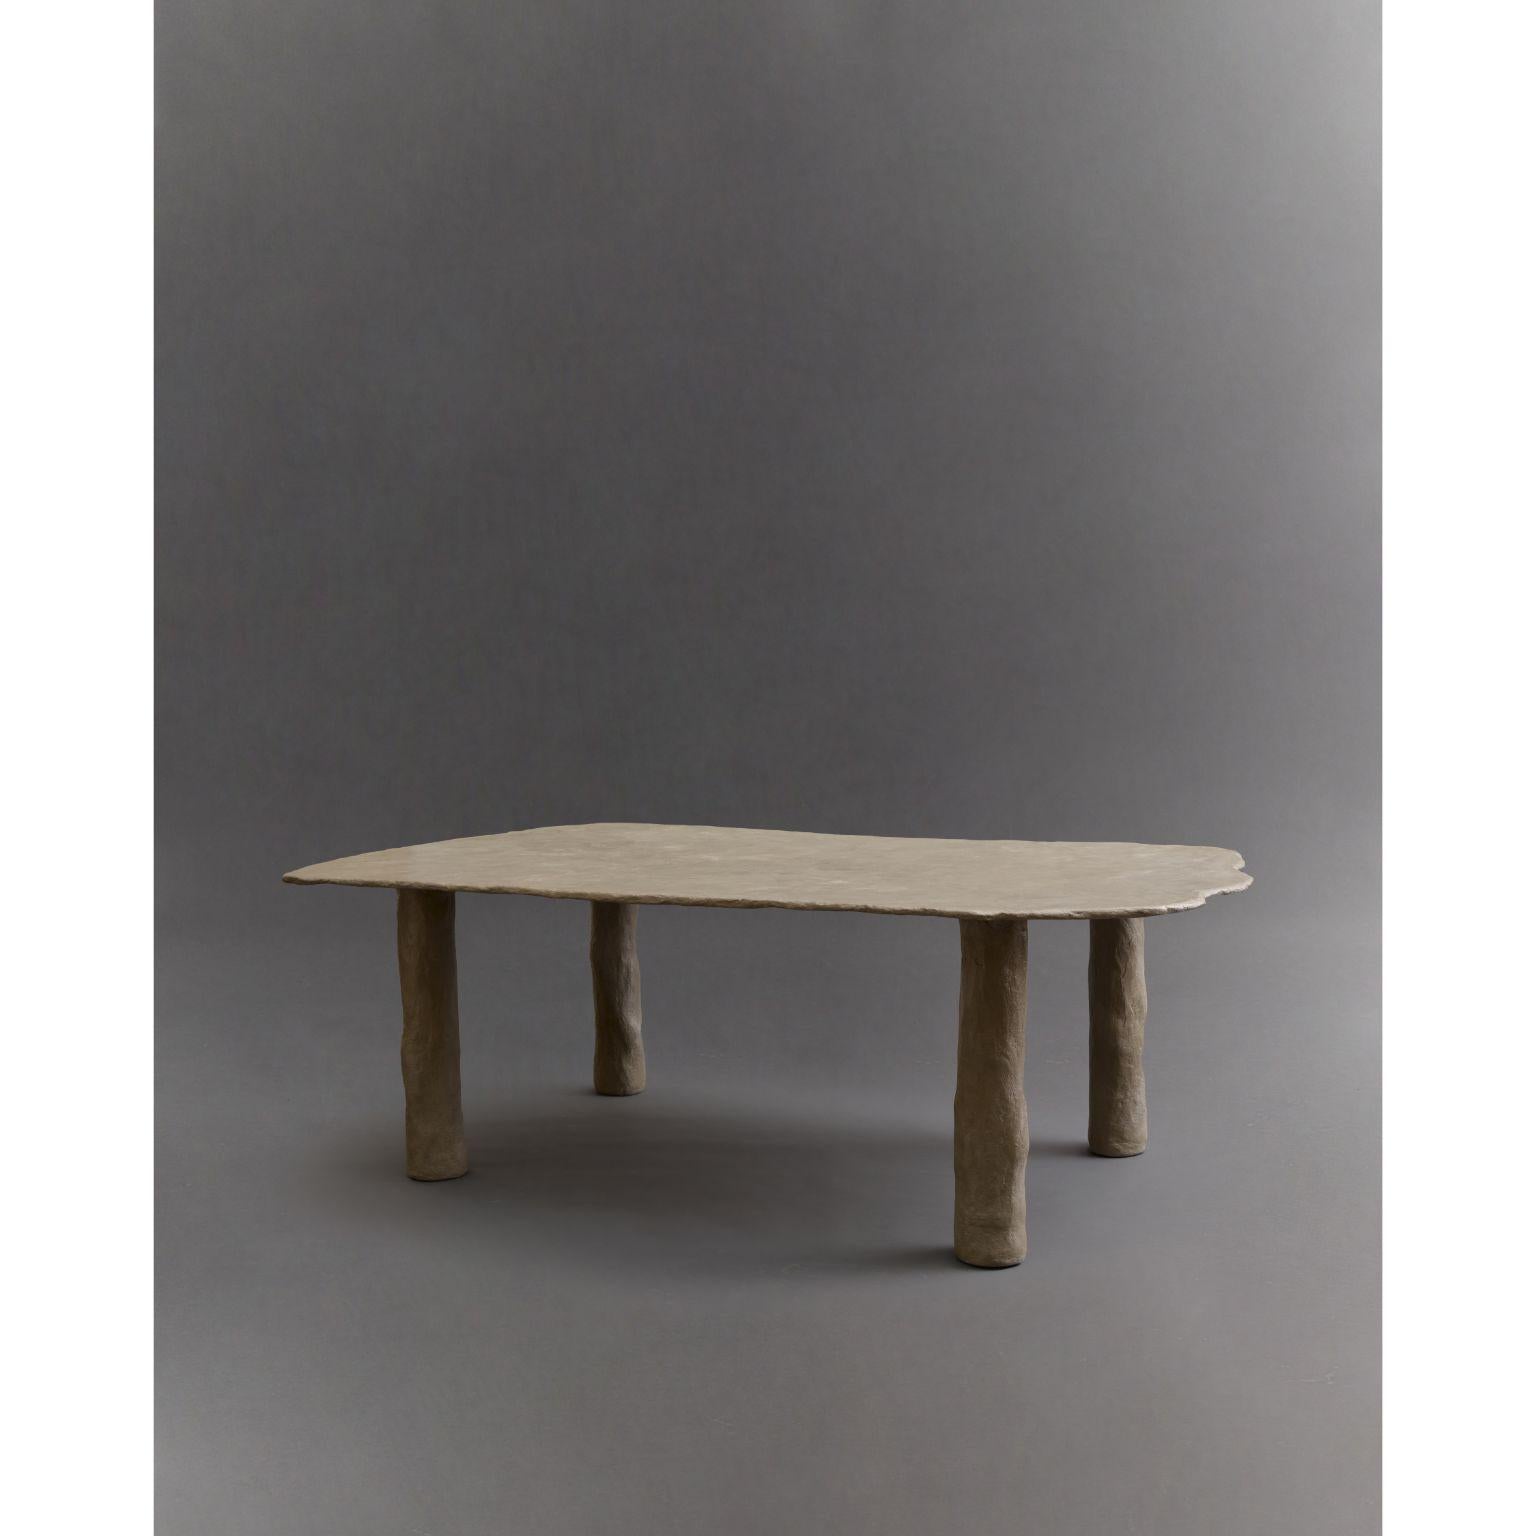 Slab dining table by Ombia
Dimensions: W 127 x D 226.5 x H 74 cm
Materials: Mix media, matte textured limewash finish. 
Custom sizes and finishes upon request.


Ombia is a ceramic sculpture and design studio based in Los Angeles. The name and